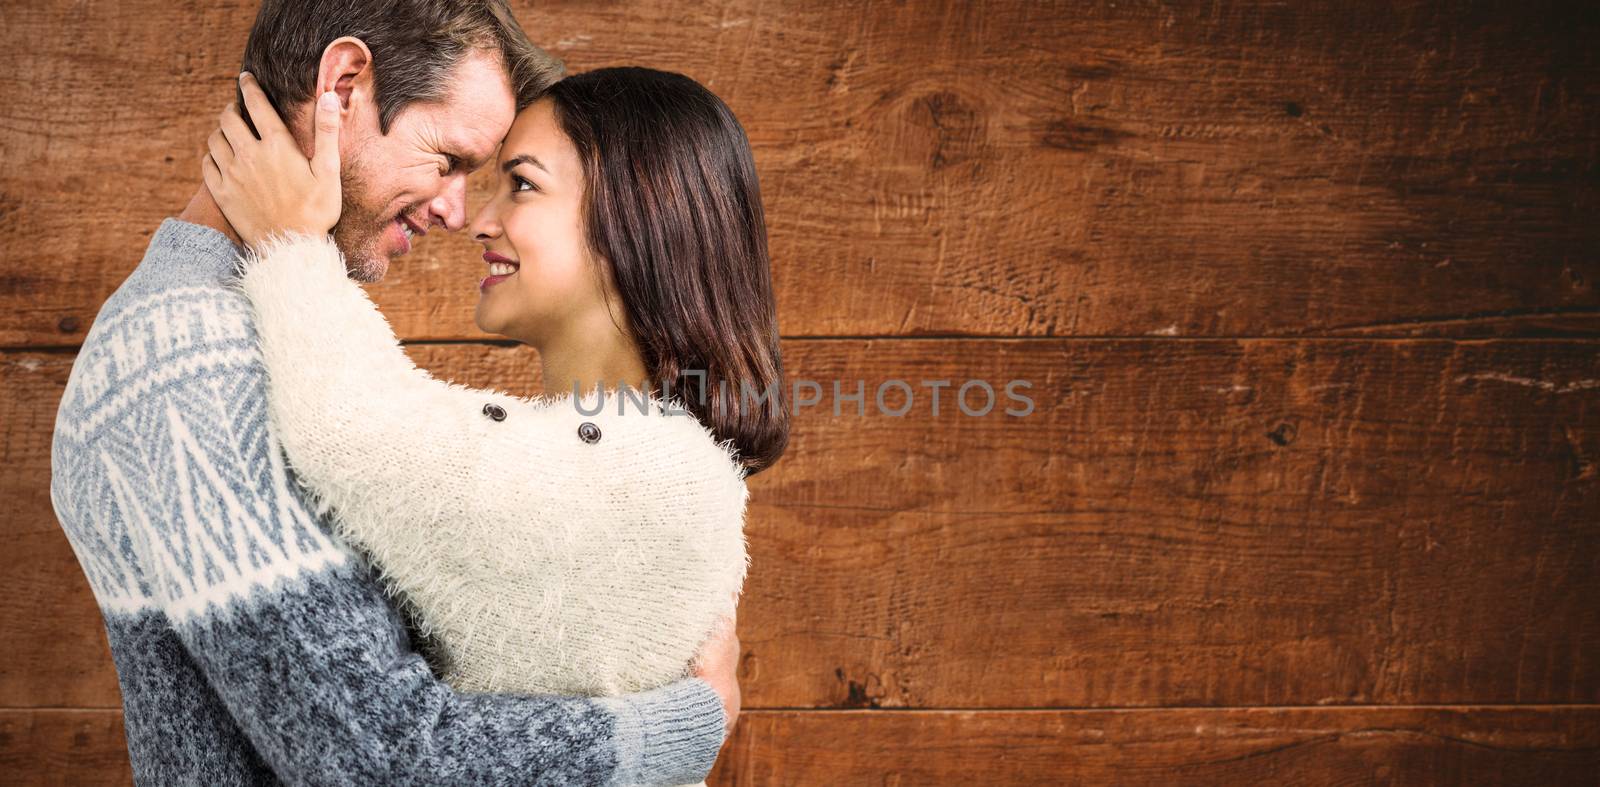 Cheerful couple in warm clothing embracing each other against overhead of wooden planks